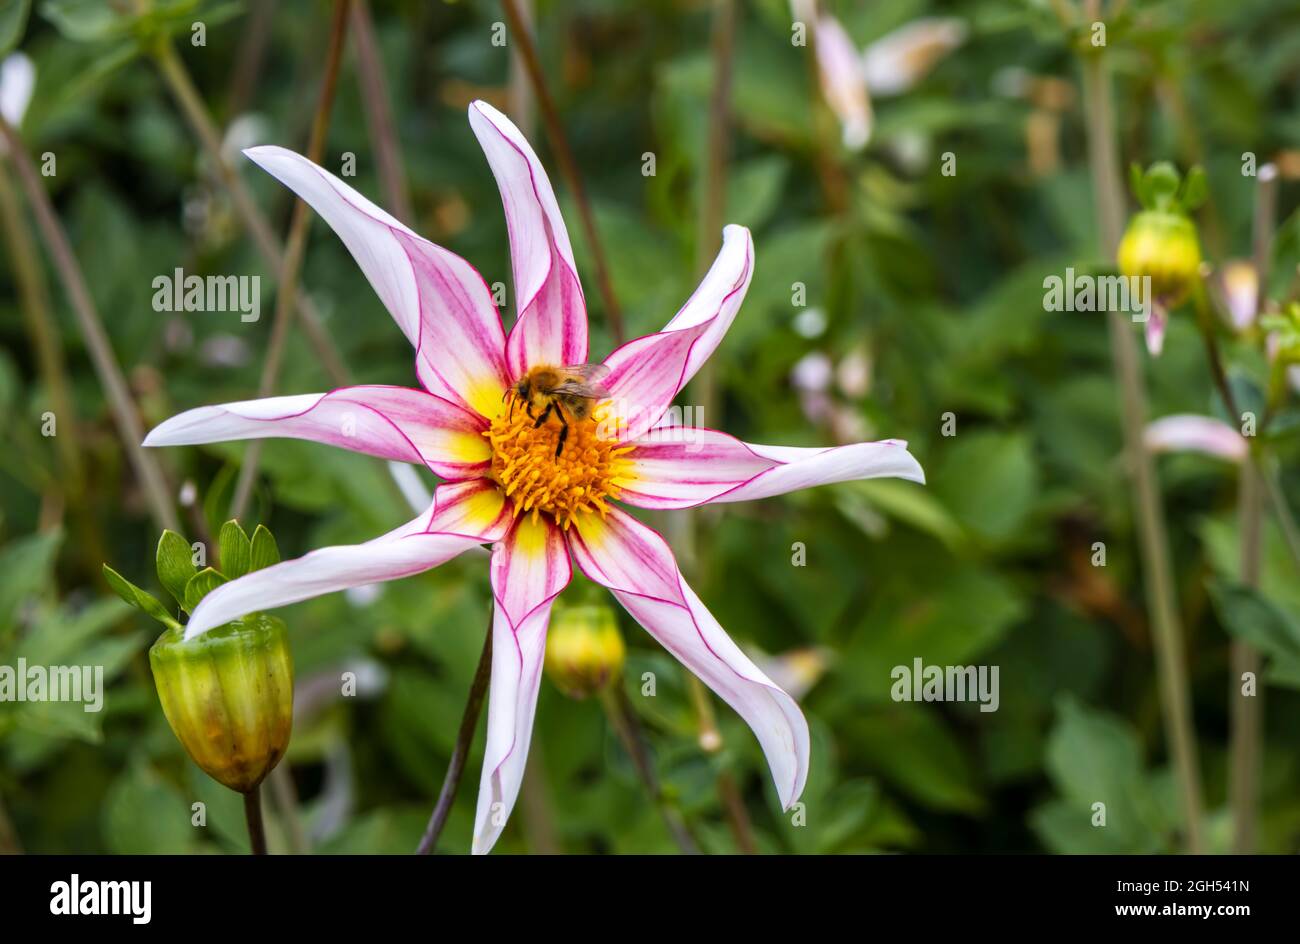 Majestic pink and white flower of Dahlia Honka Fragile pollinated by a bee. Stock Photo